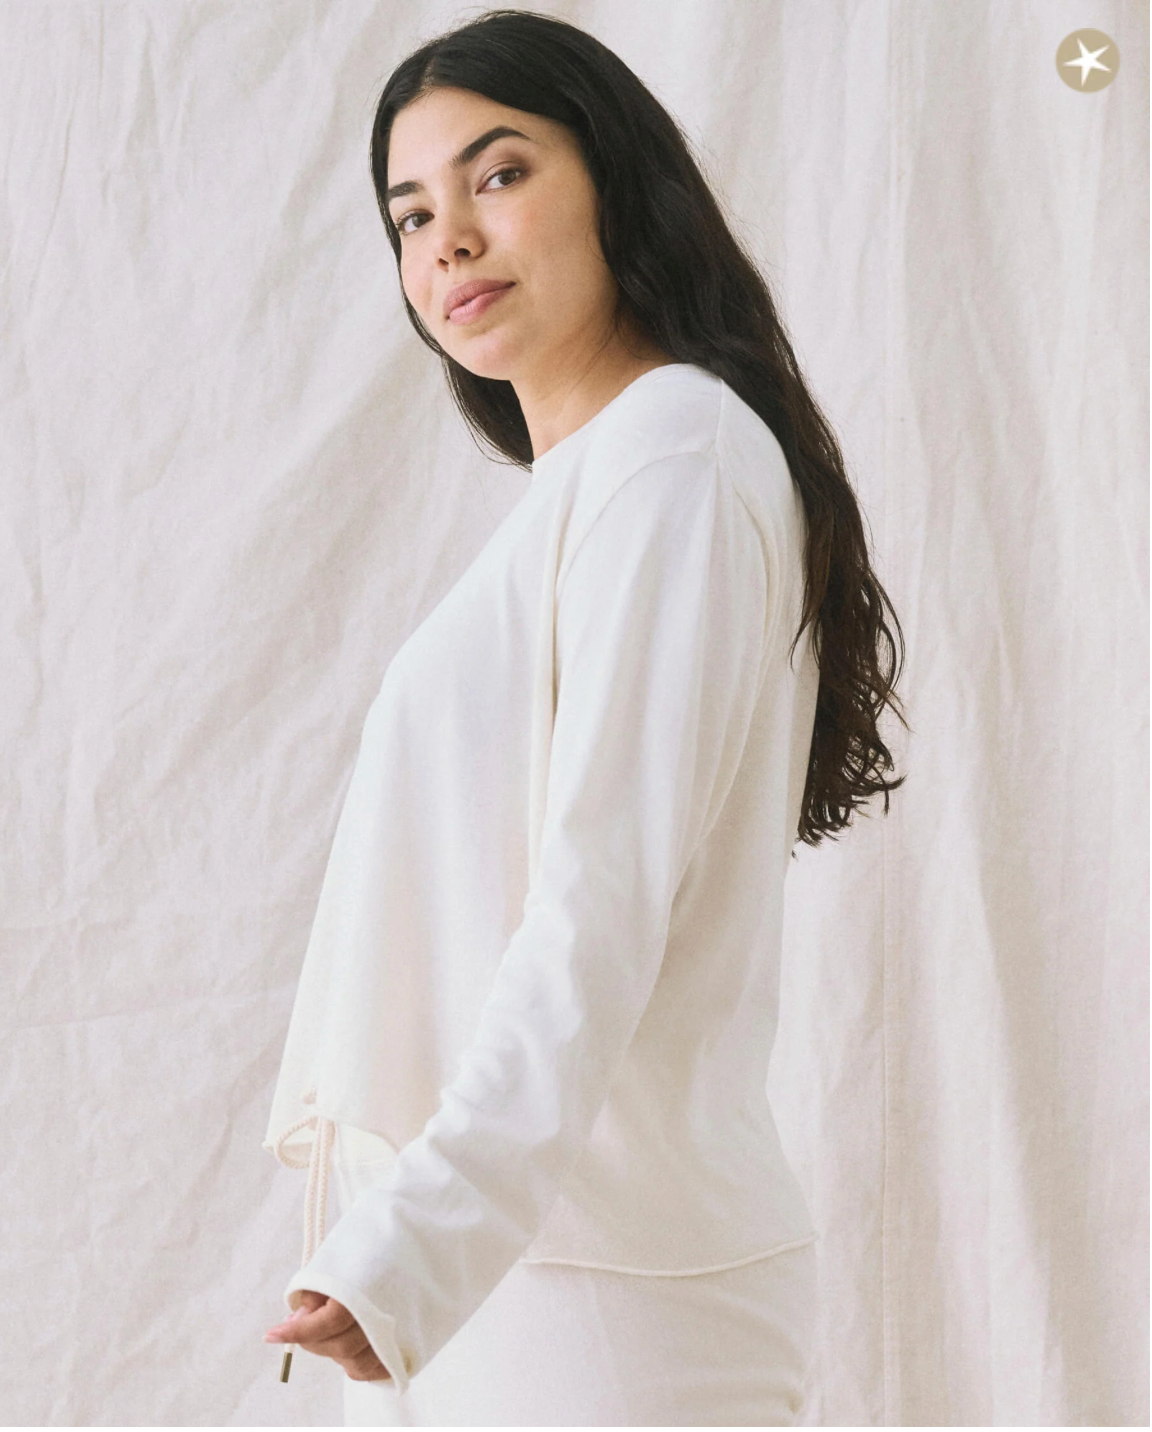 The Long Sleeve Crop Tee. Washed White